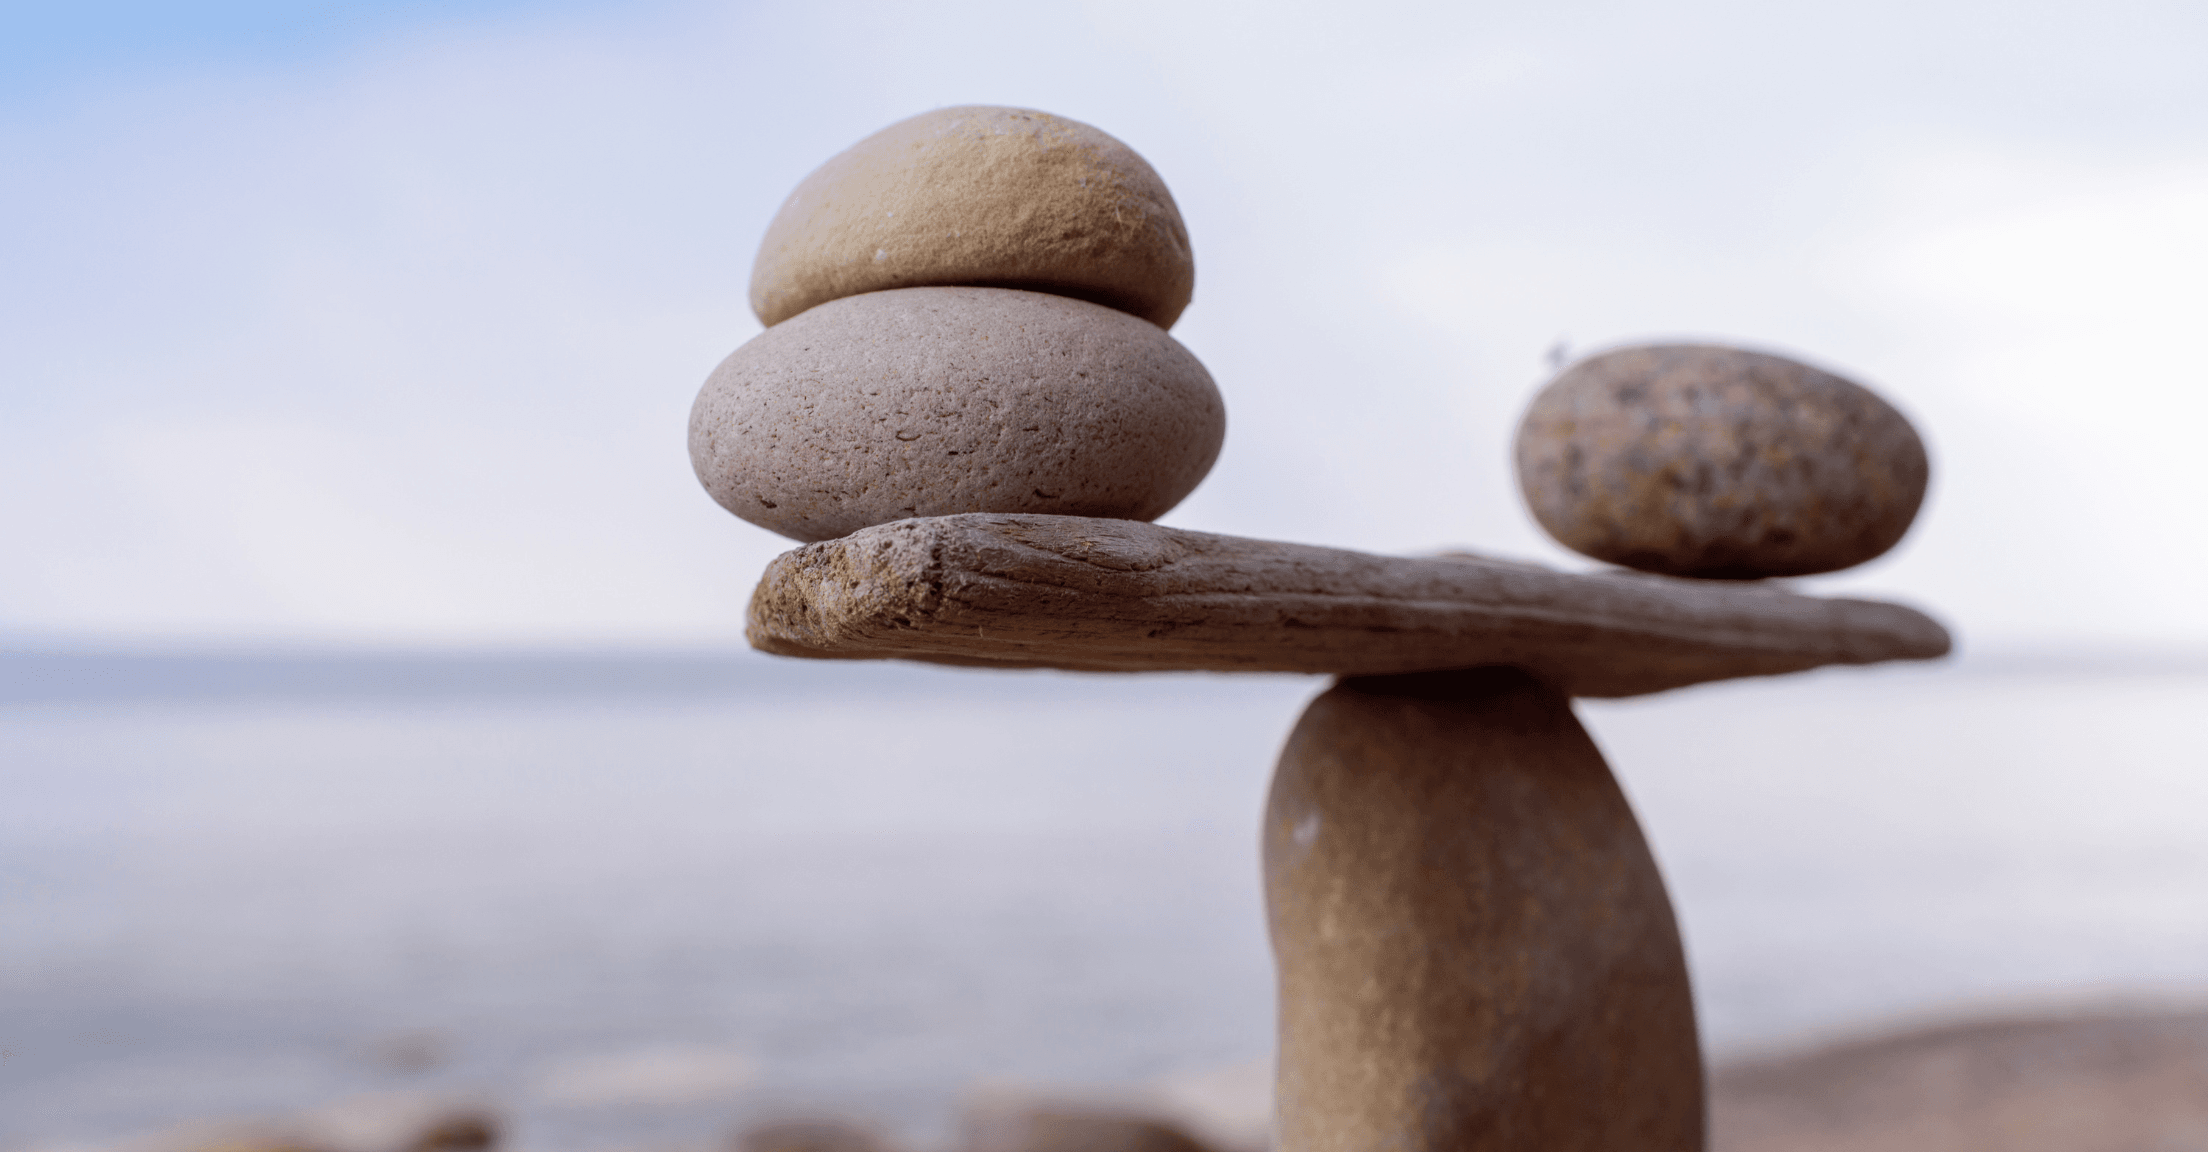 Rocks balanced on a board in front of water